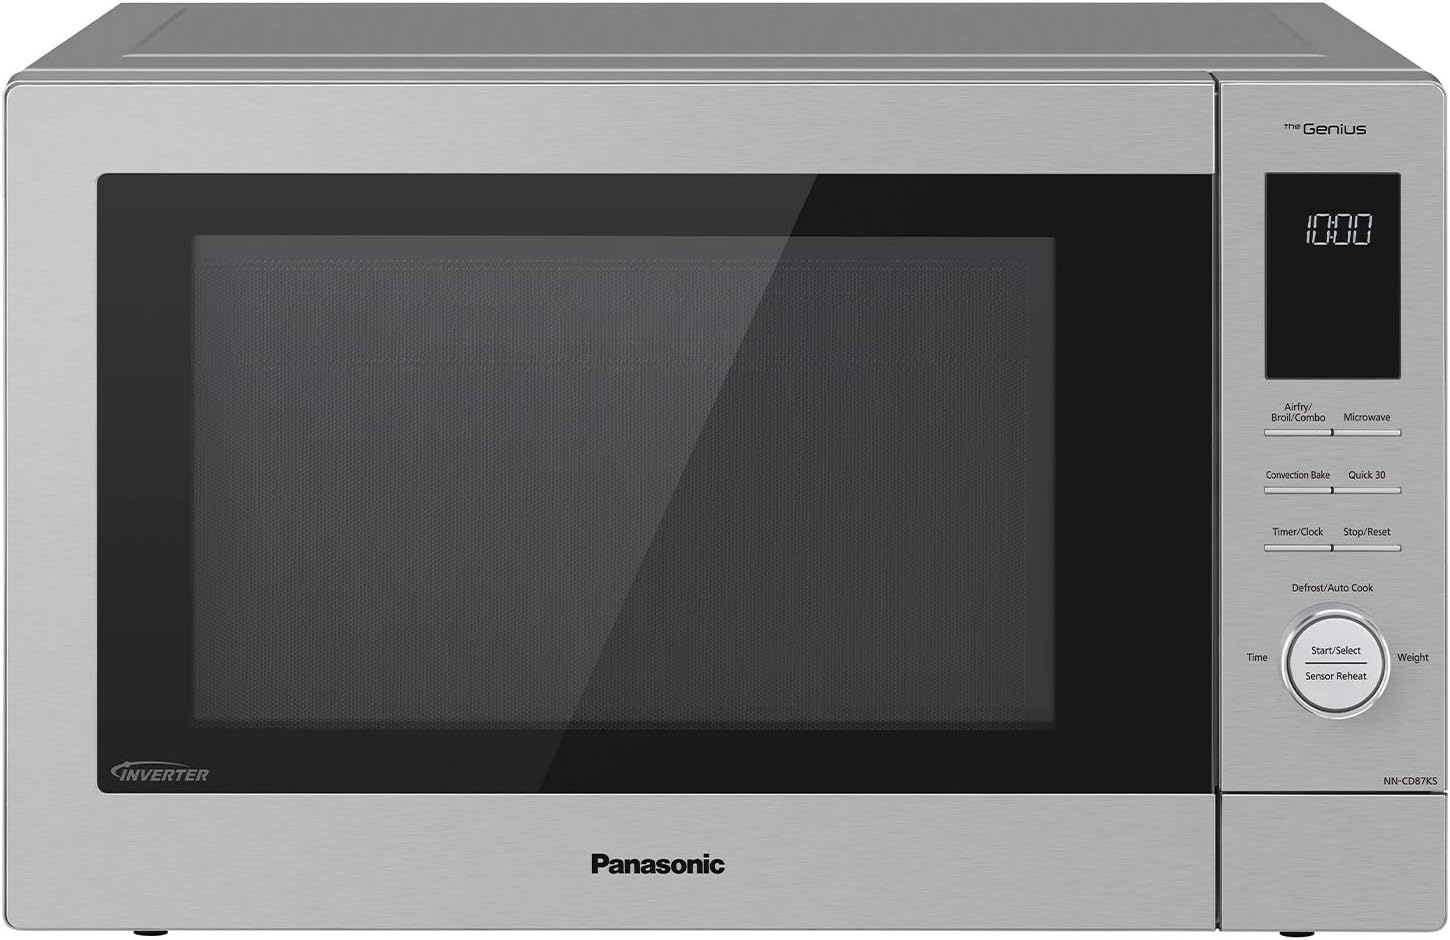 Panasonic HomeChef 4-in-1 Microwave Oven with Air [...]